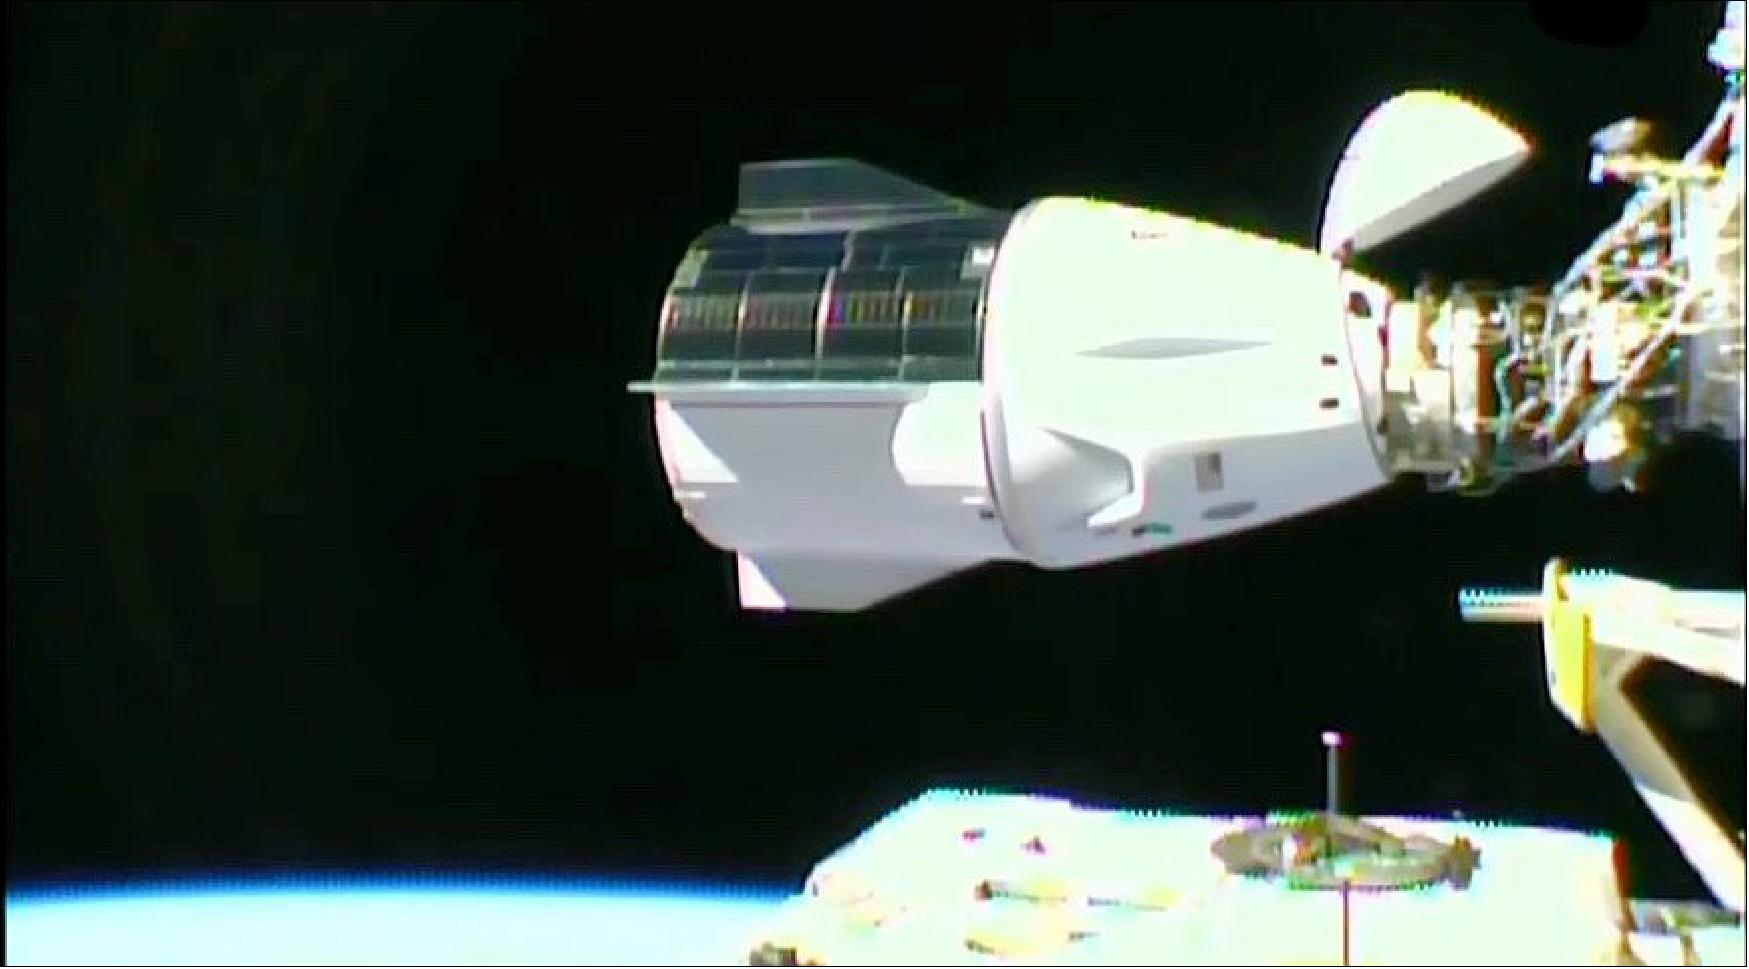 Figure 13: The Crew Dragon spacecraft Endurance docked to the station's Harmony module (image credit: NASA TV)